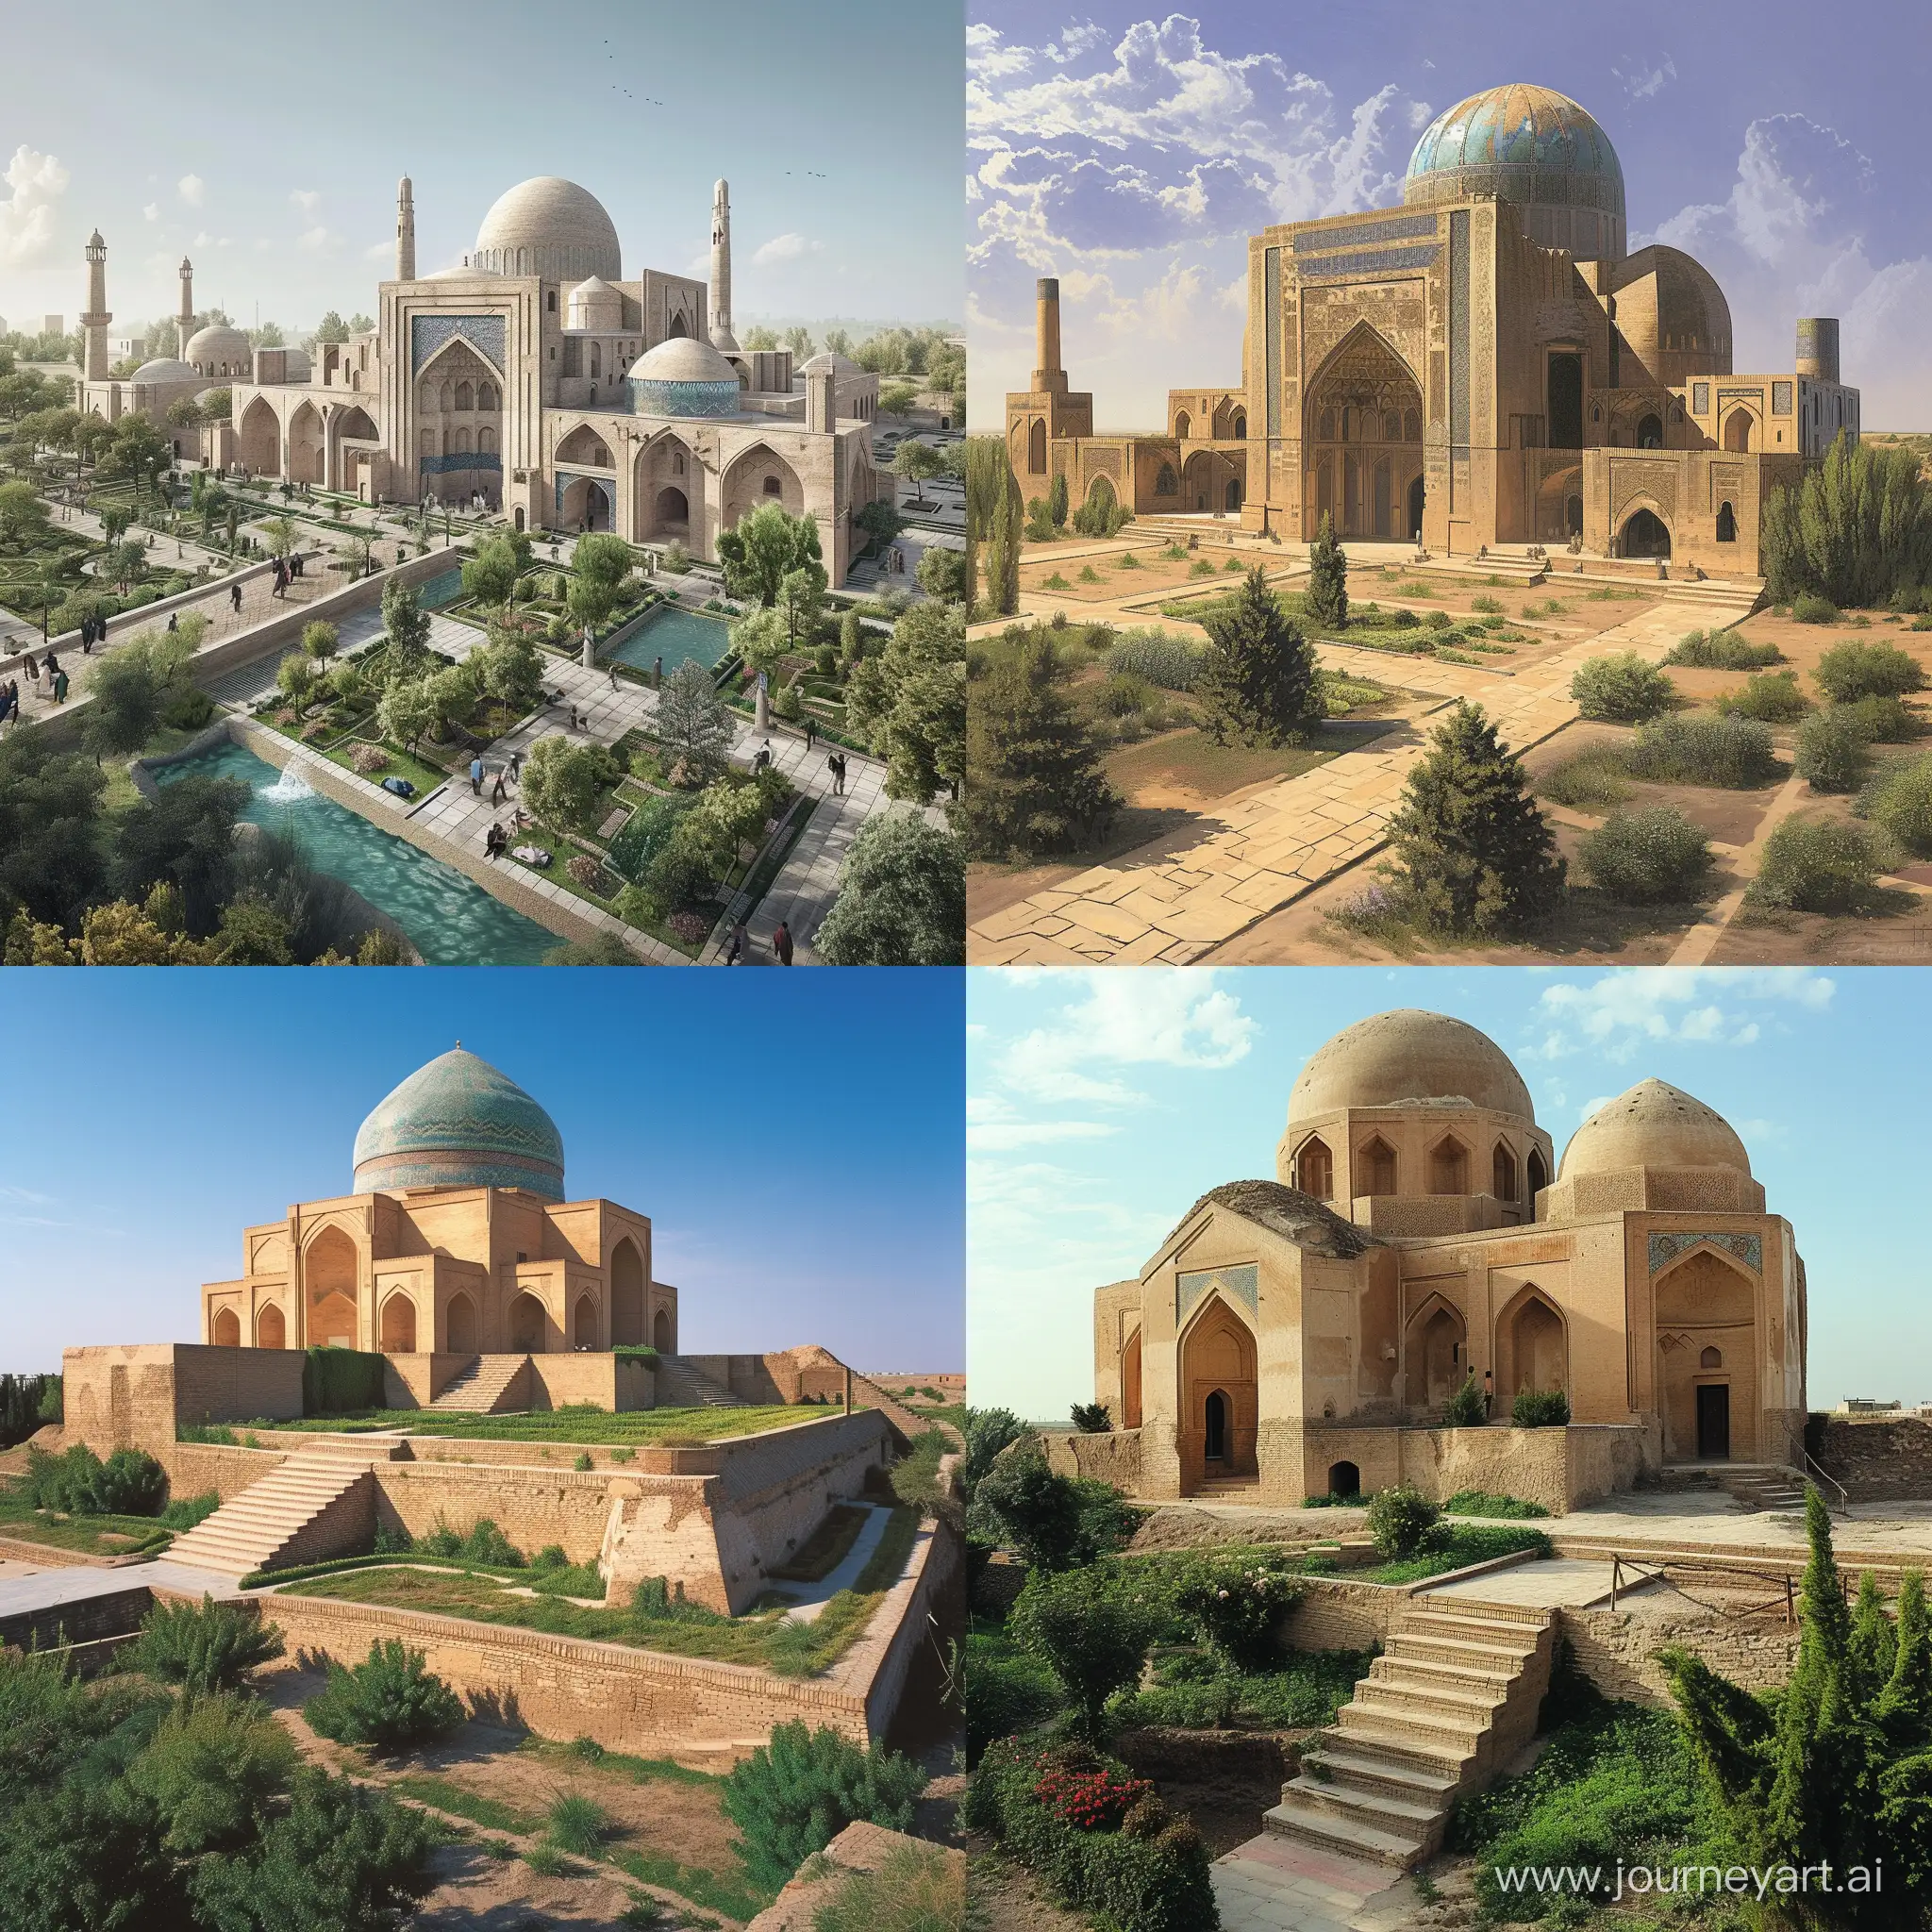 Merv, in the Khwarazm Empire, showcased architectural marvels, grand mosques, cultural vibrancy, and lush gardens. Its strategic location on the Silk Road facilitated trade and cultural exchange, leaving a rich historical legacy.